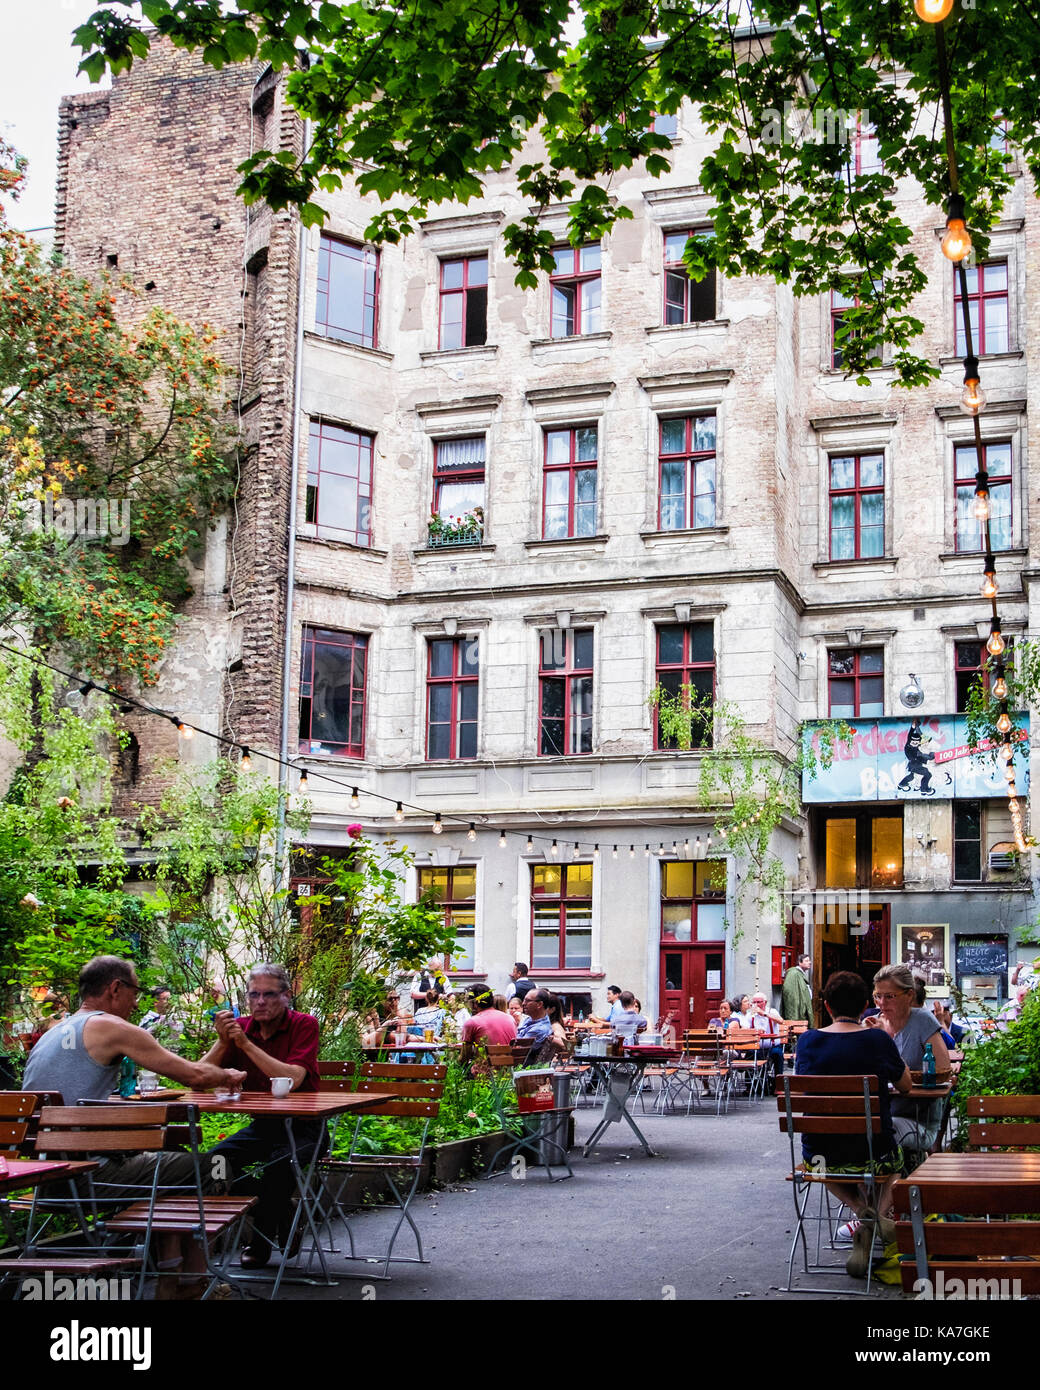 Germany,Berlin.Clärchens Ballhaus,Old Ball room and dance hall with outdoor eating area Stock Photo